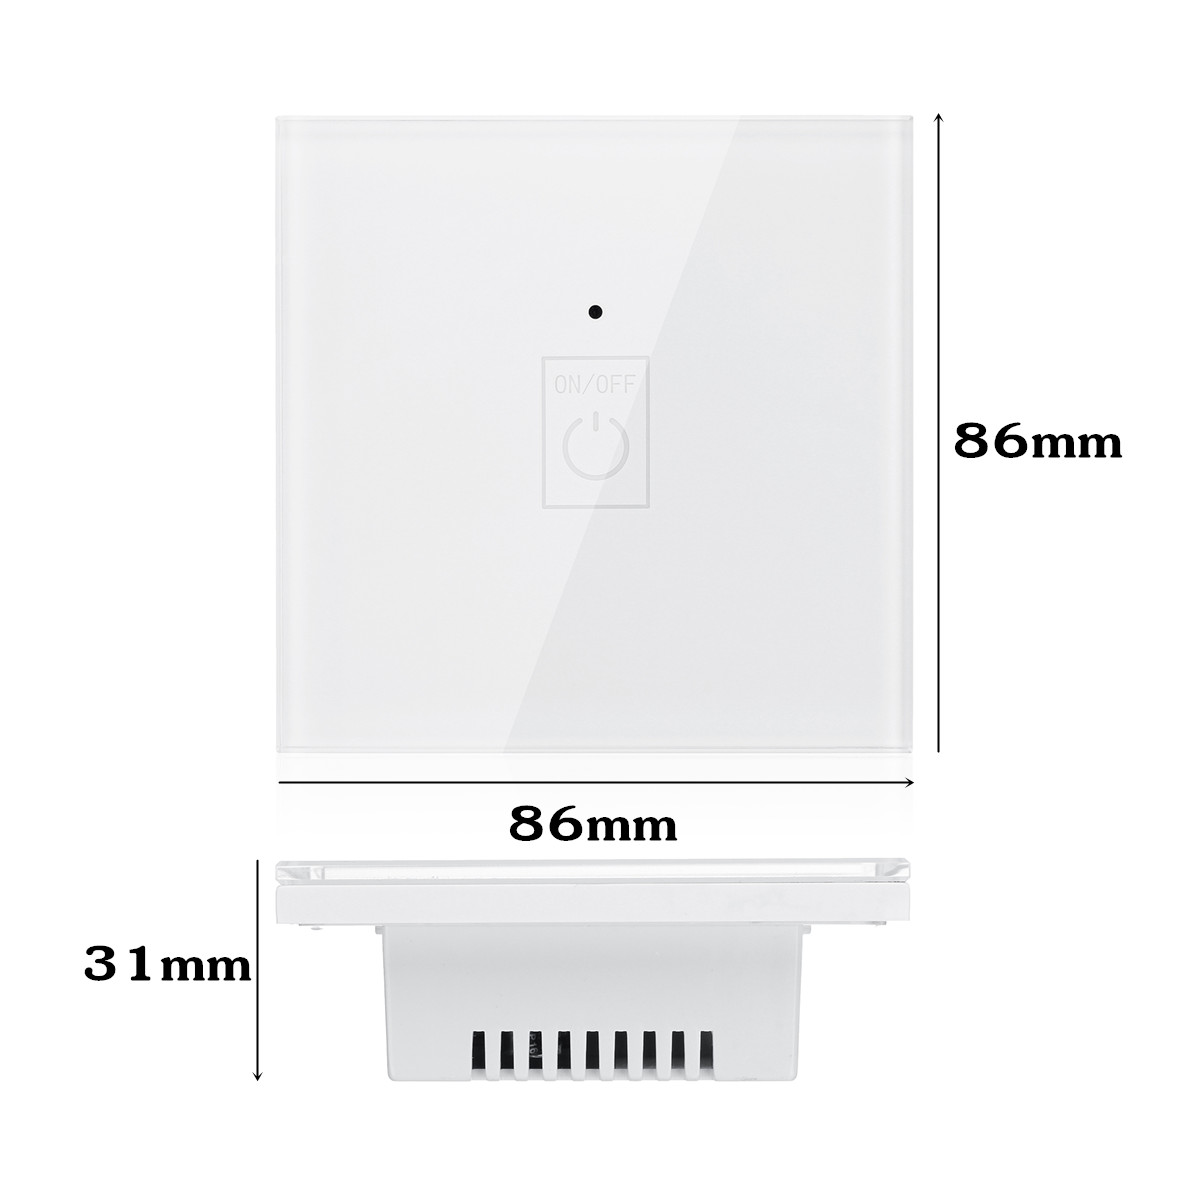 123Gang-WiFi-Smart-Wall-Light-Remote-Control-Panel-Switch-for-Amazon-Echo-Google-Home-1323805